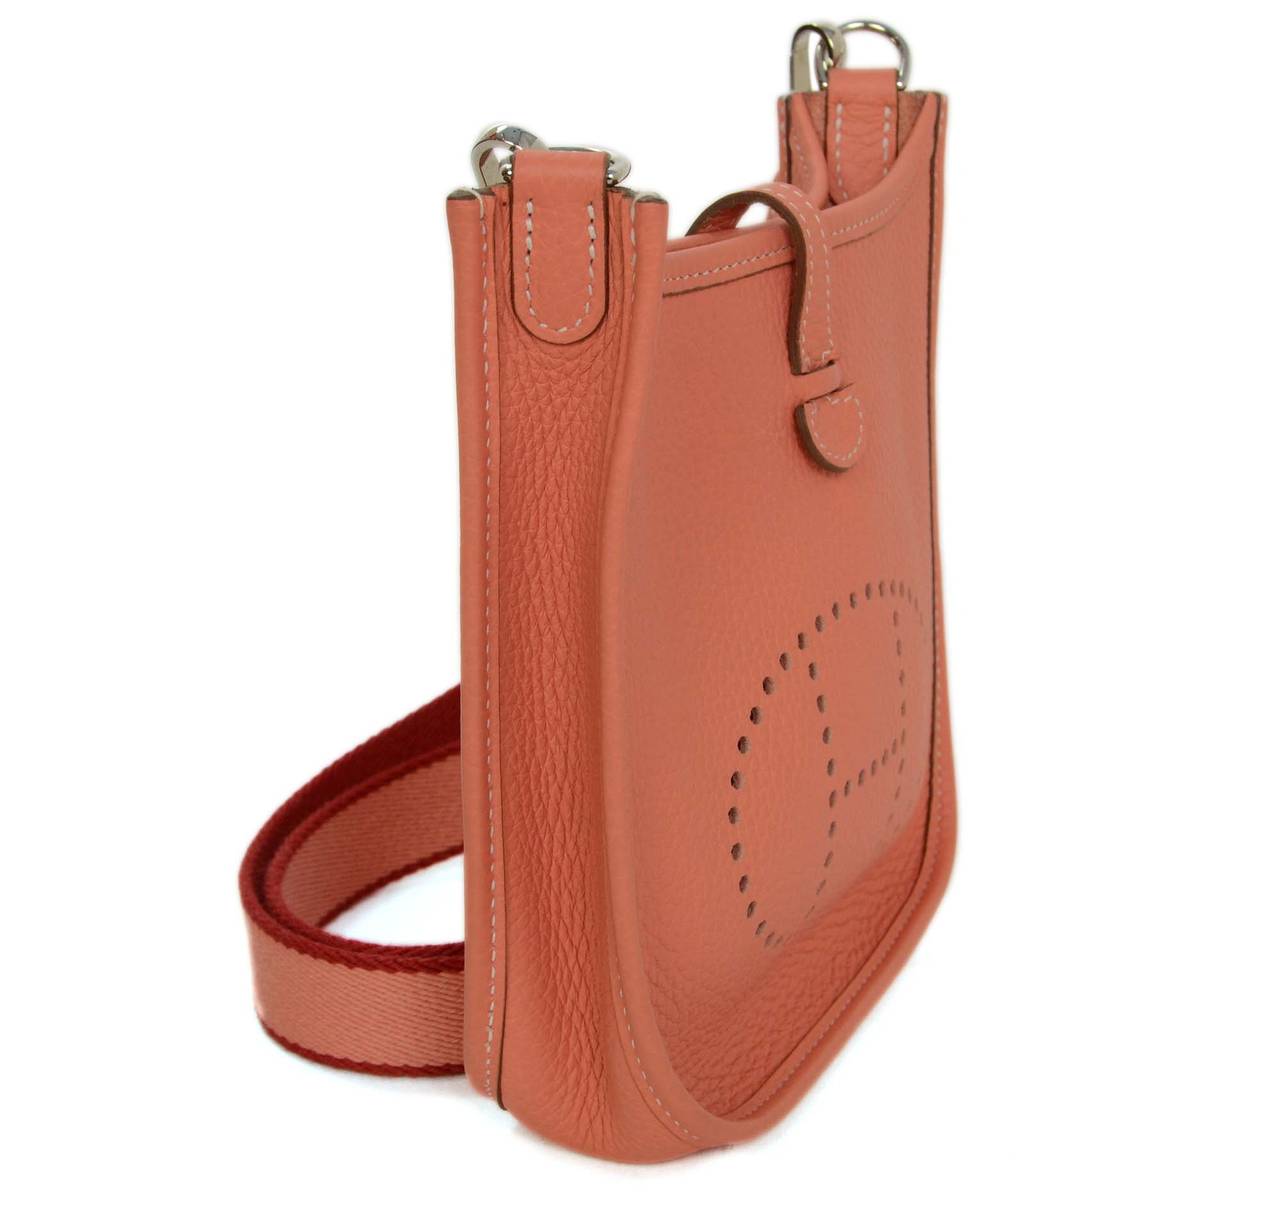 Hermes Peach Crevette Clemence Leather Evelyne TPM Bag
Features detachable canvas crossbody strap
Made in: France
Year of Production: 2013
Color: Crevette (peachy color)
Hardware: Palladium
Materials: Clemence leather and palladium